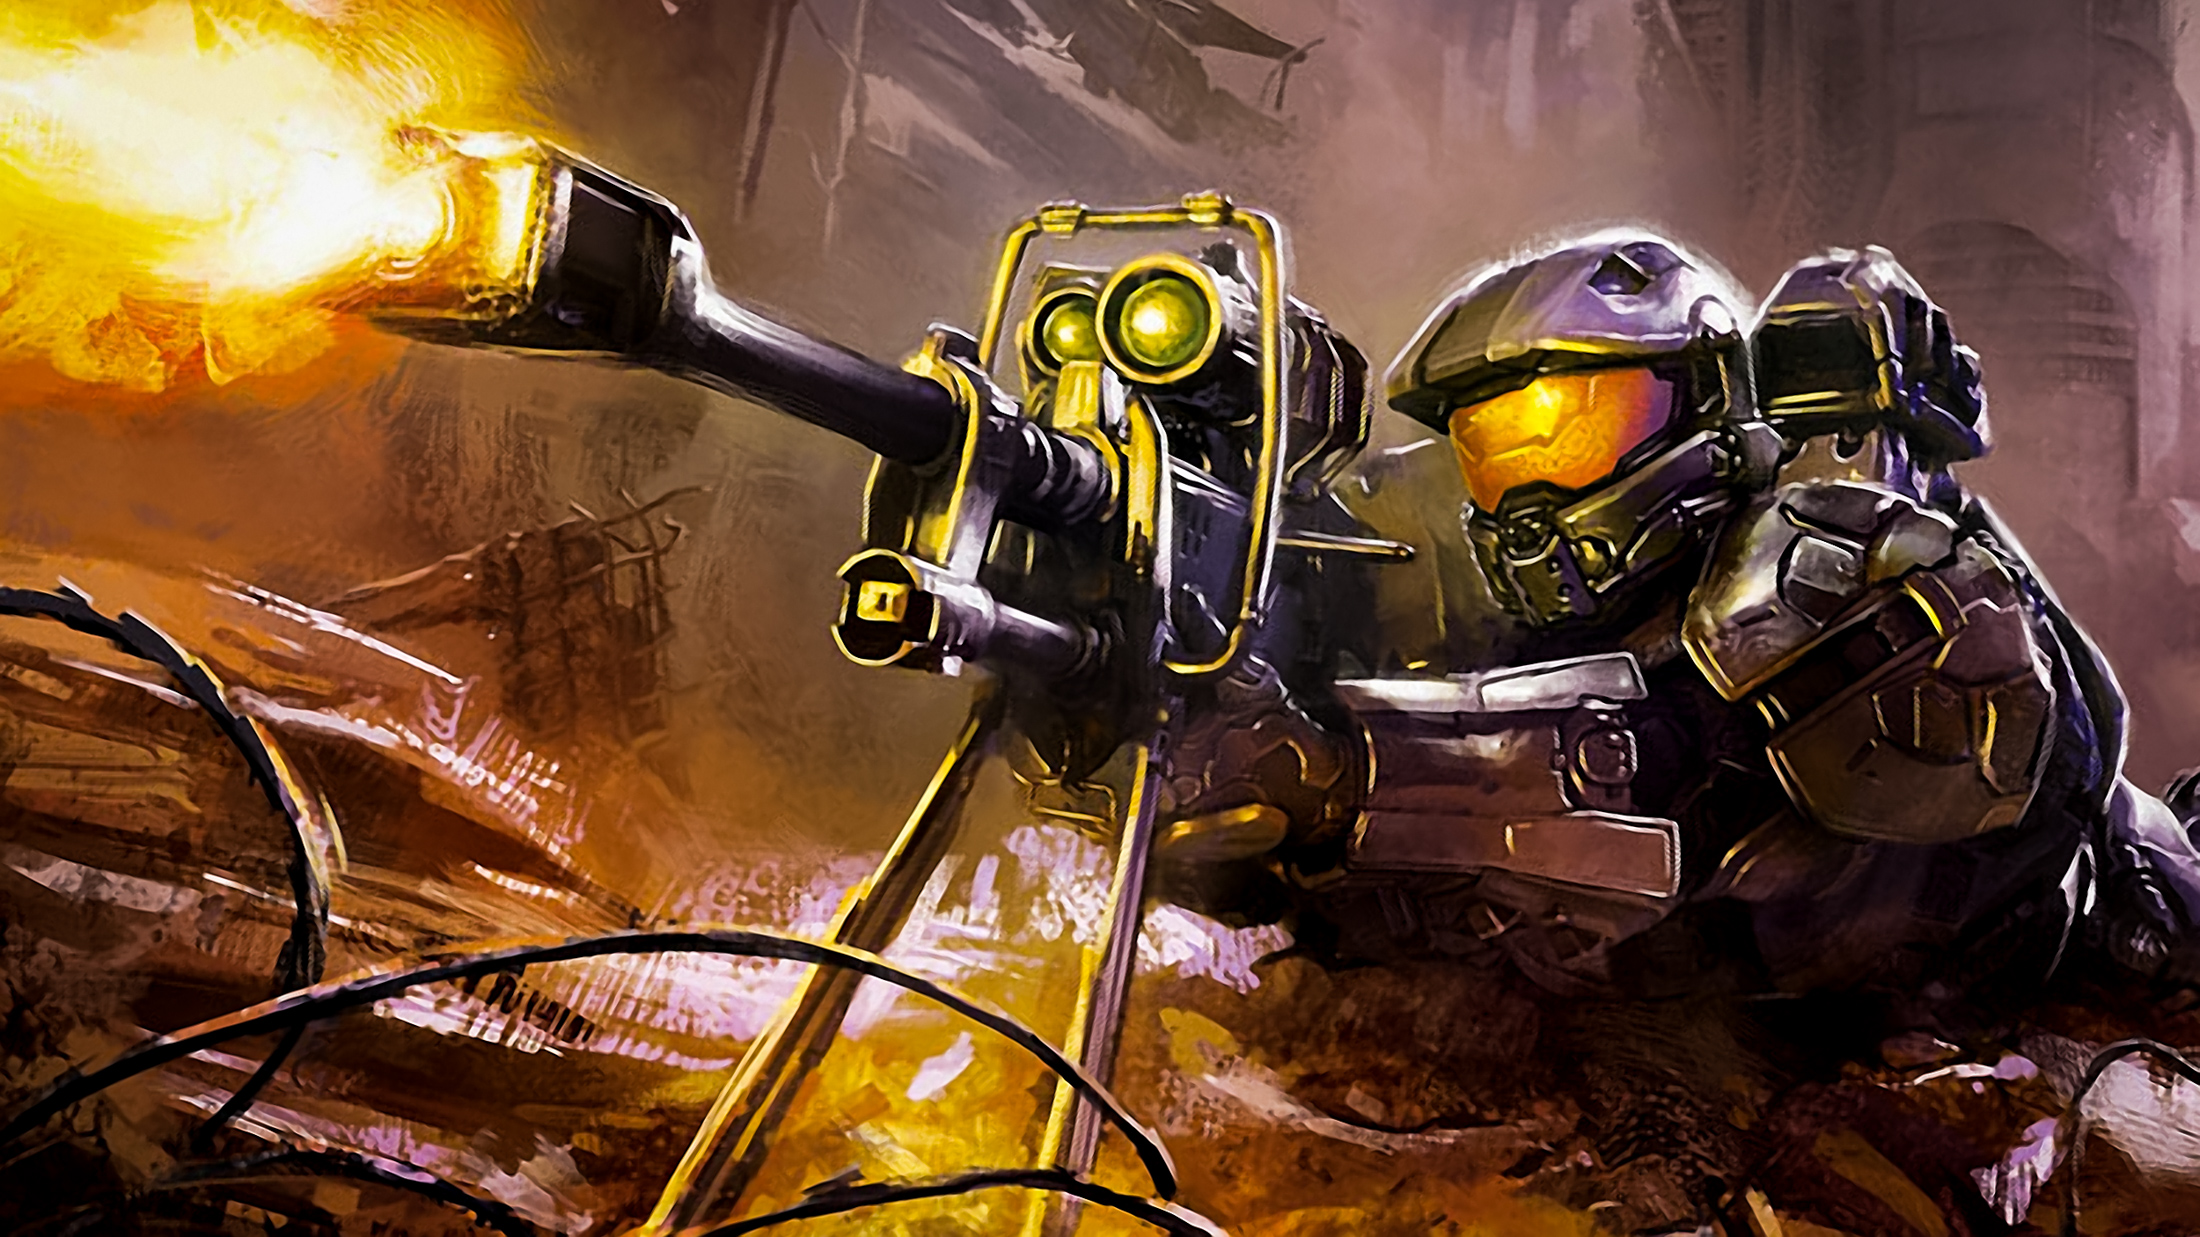 Halo download free for windows